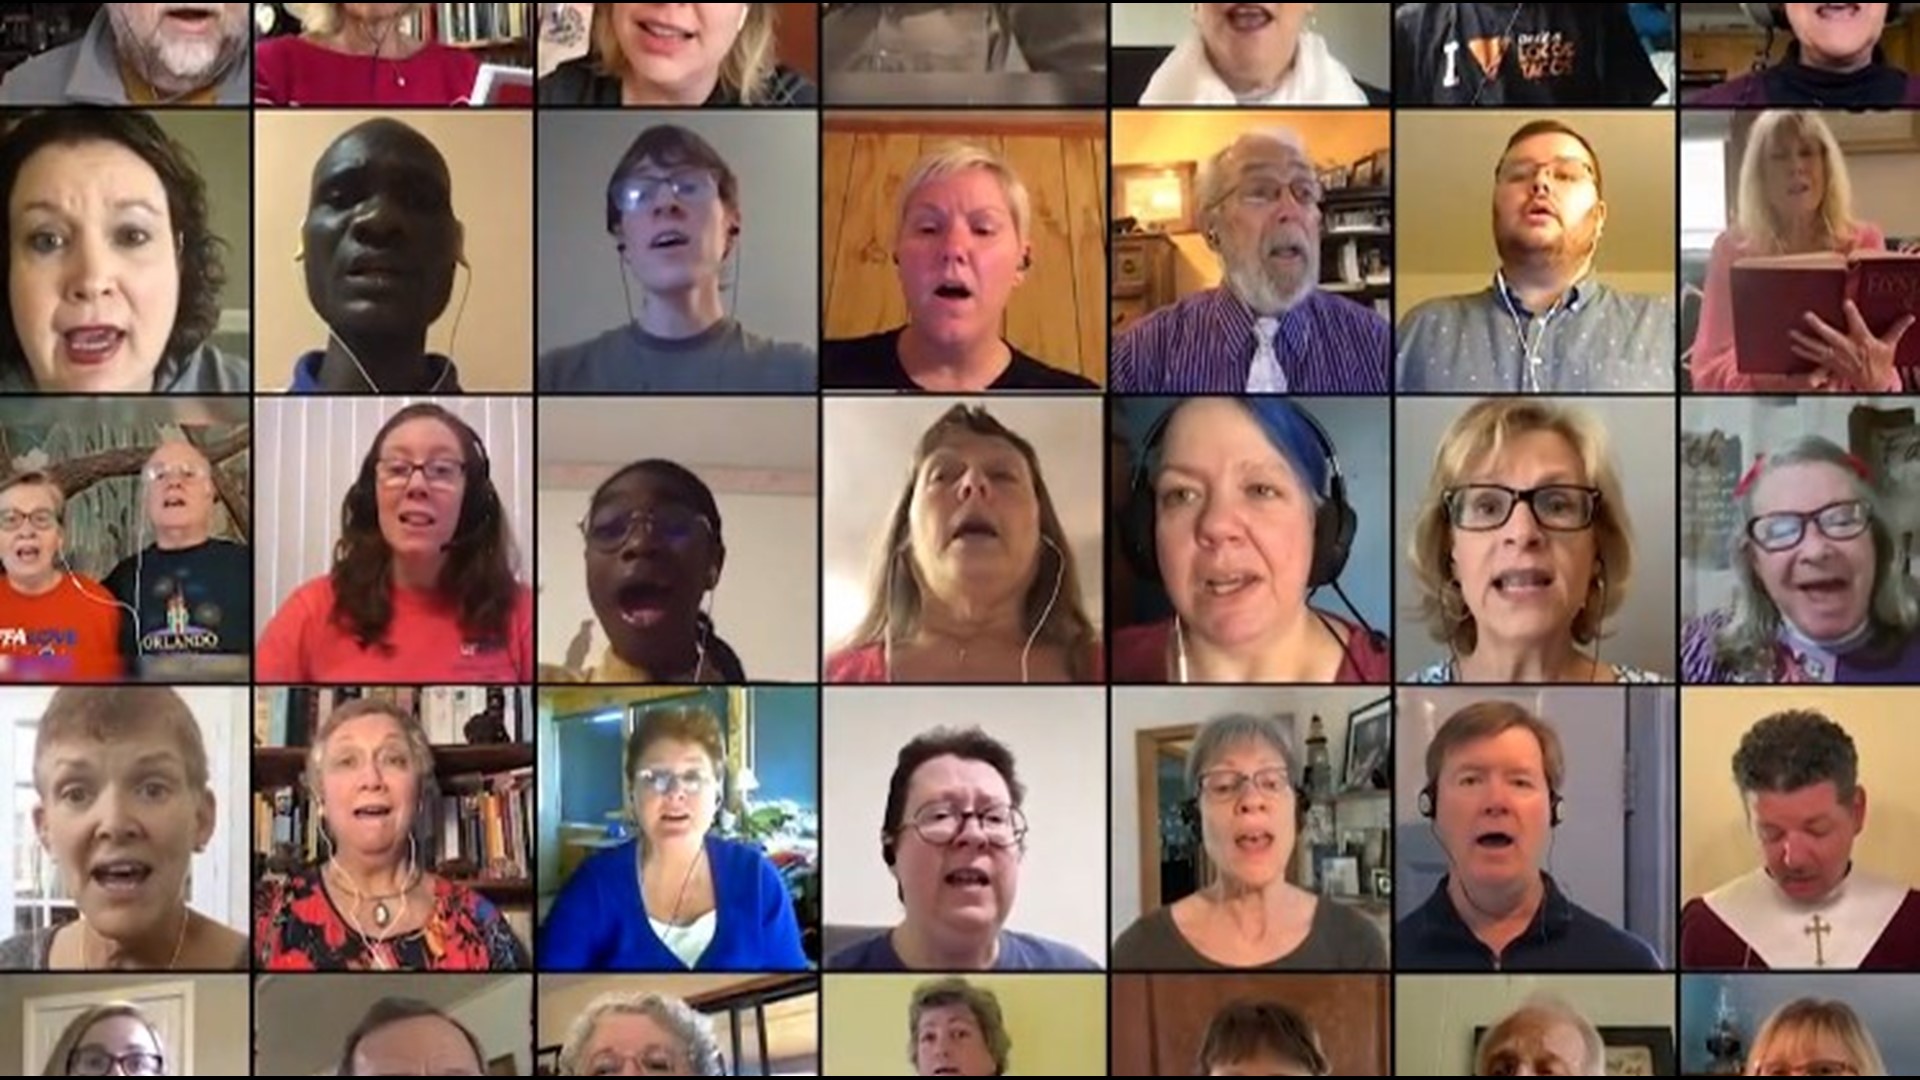 The virtual choir project was commissioned by The United Methodist Church. It includes hundreds of video submissions from singers across the world